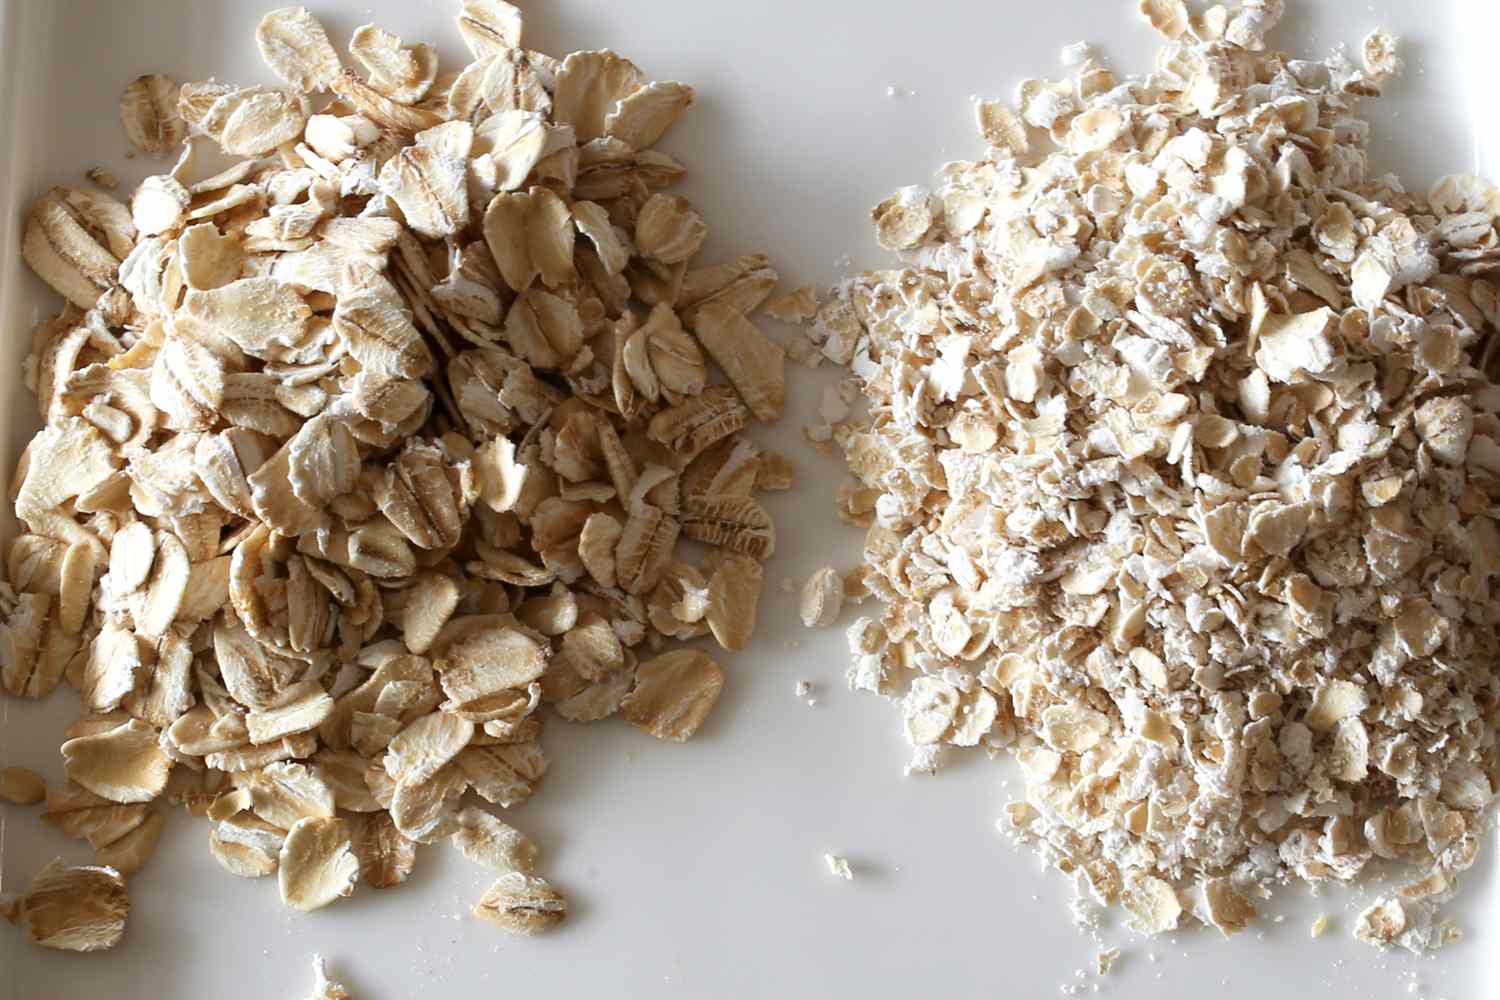 Can I use quick oats instead of old-fashioned oats for baking